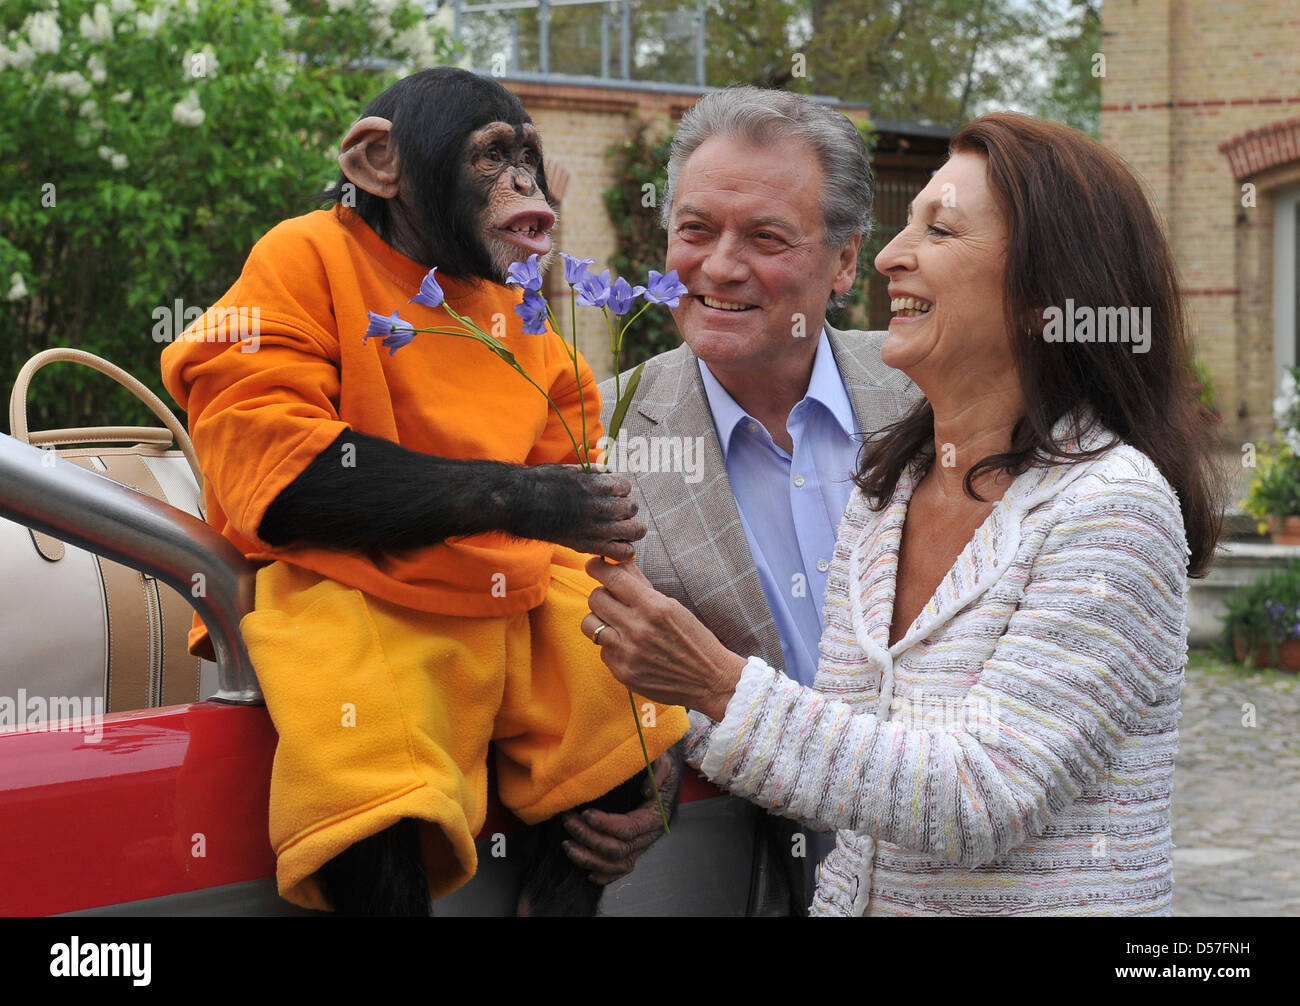 Ape Charly and cast members (L-R) Hans-Juergen Baeumler and Daniela Ziegler pose at the set in Stahnsdorf, Germany, 13 May 2010. German public braodcaster ZDF will shoot the 16th season of the popular series Unser Charly (Our Charly) until autumn 2010. Broadcasting is scheduled for 2011. Photo: Bernd Settnik Stock Photo